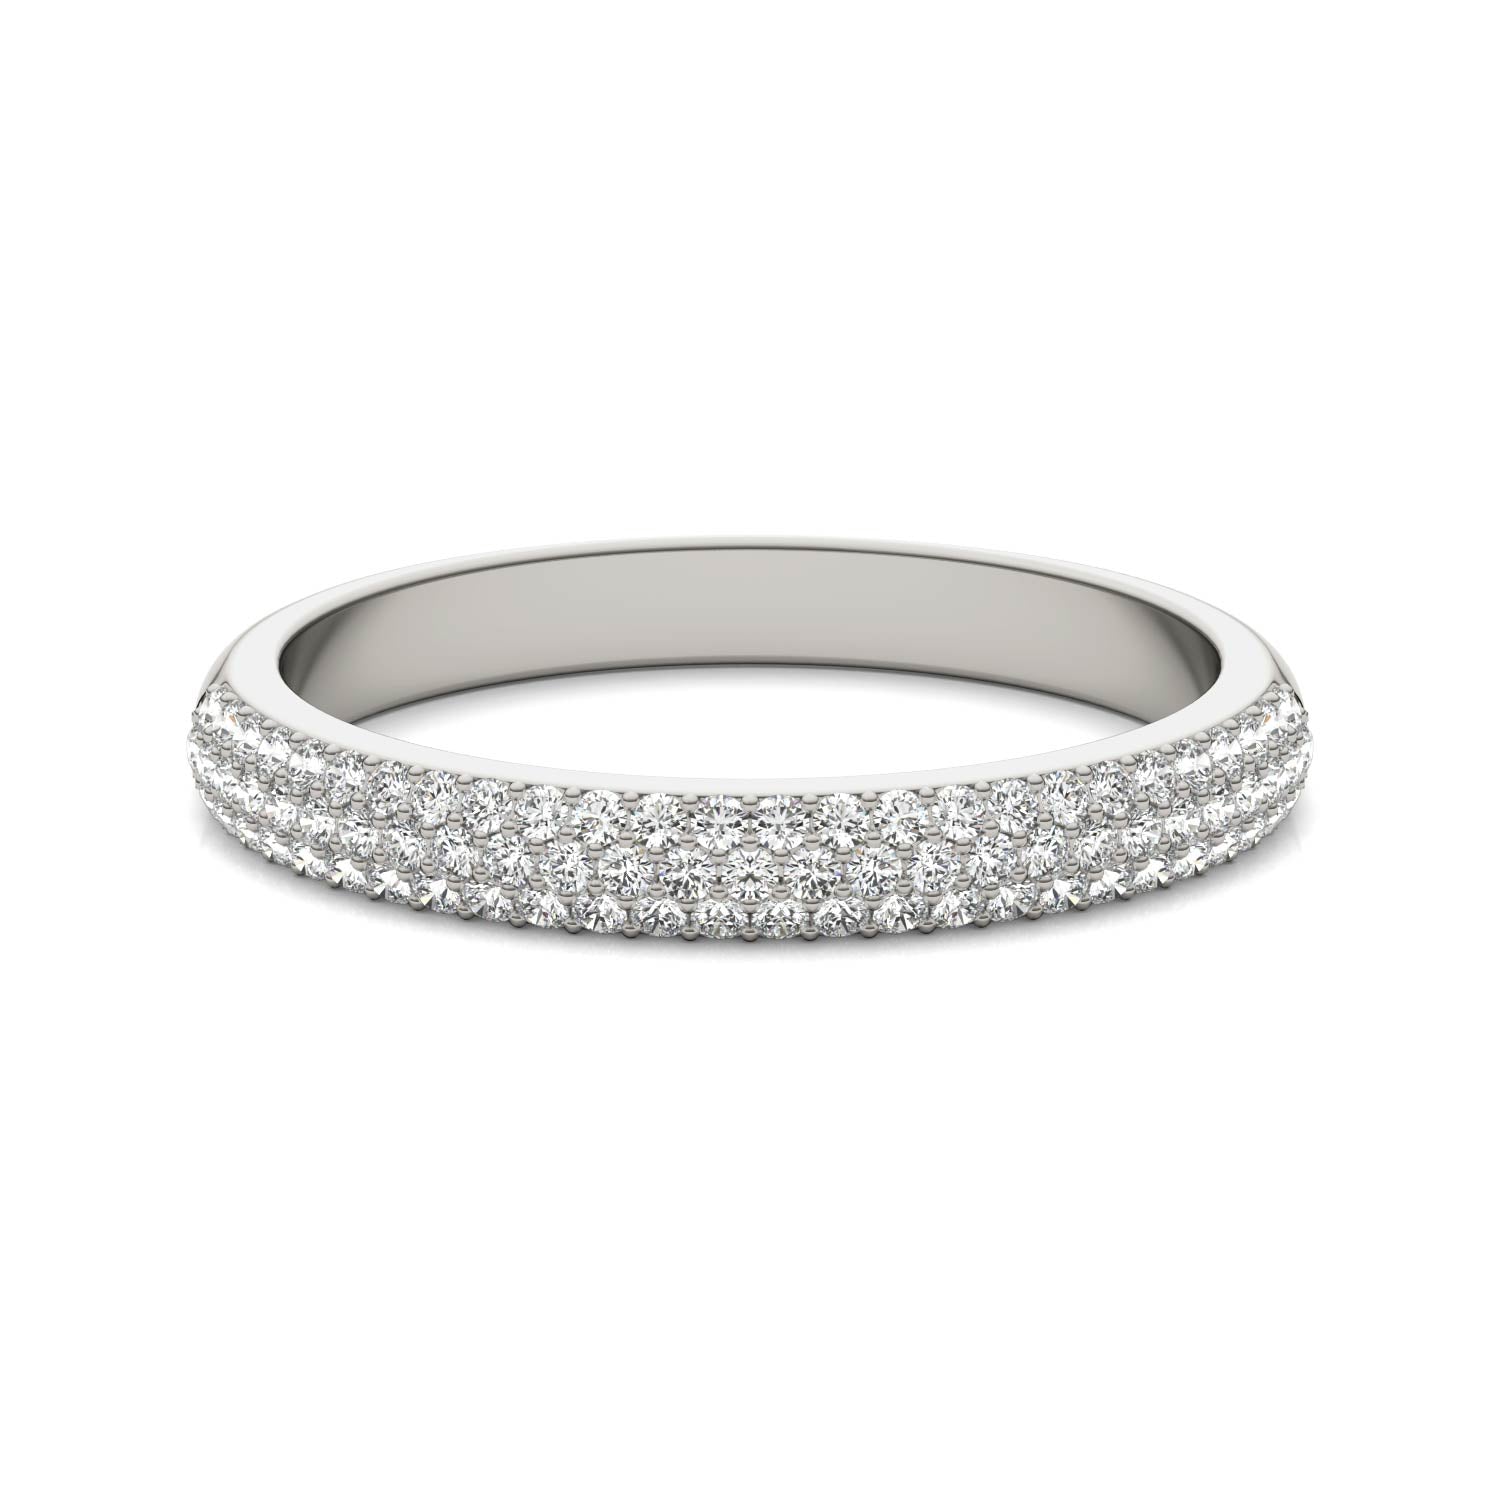 0.17 CTW DEW Round Moissanite Pave Ring in 14K White Gold